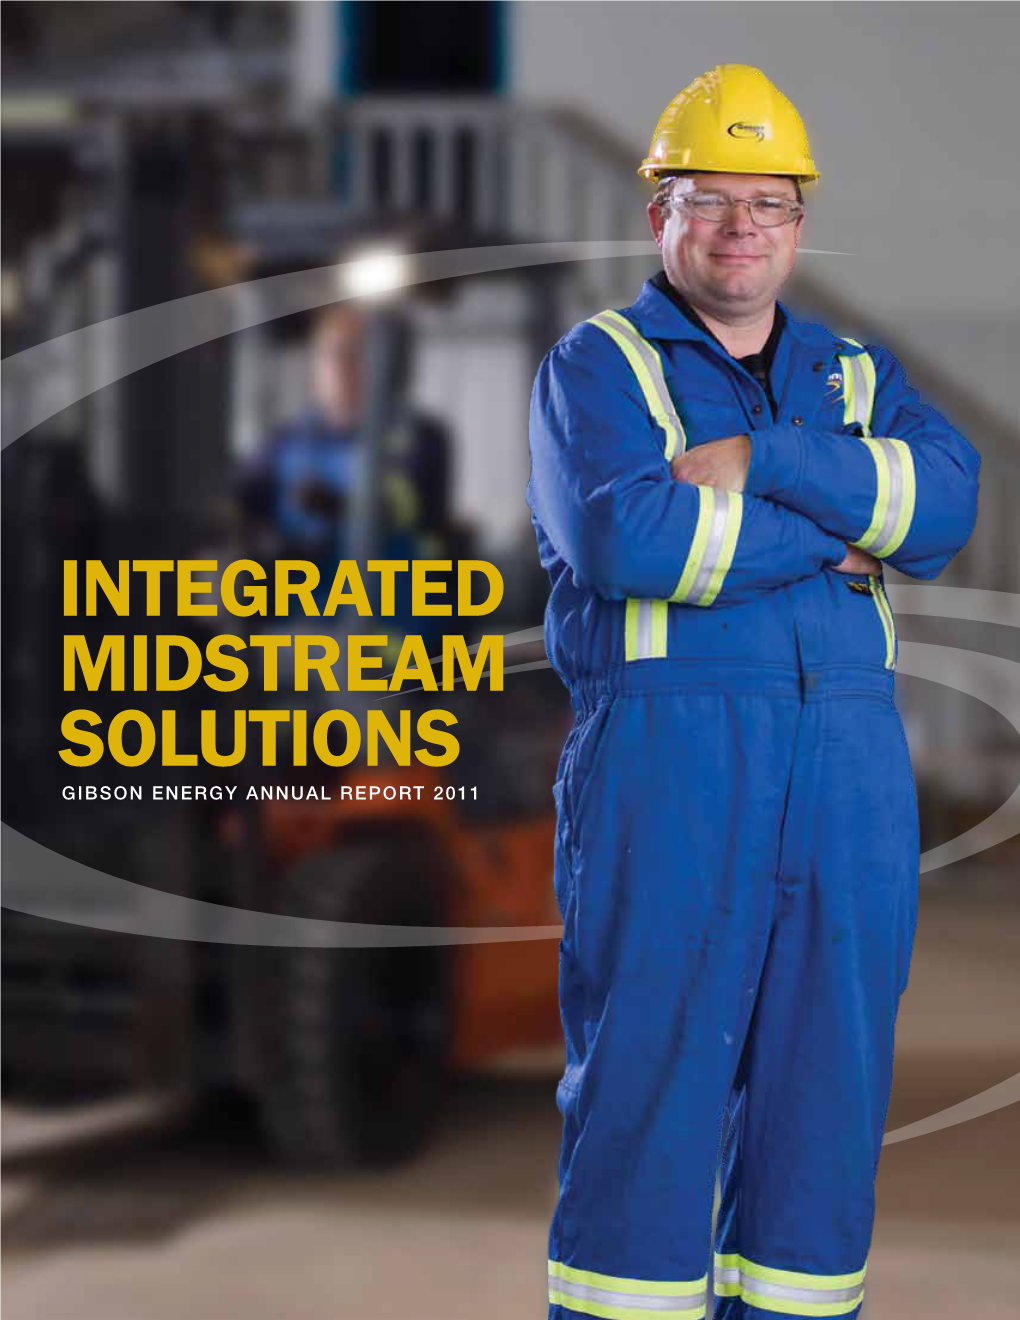 INTEGRATED MIDSTREAM SOLUTIONS GIBSON ENERGY ANNUAL REPORT 2011 1950 2011 1,037 Year Founded Went Public Number of Employees